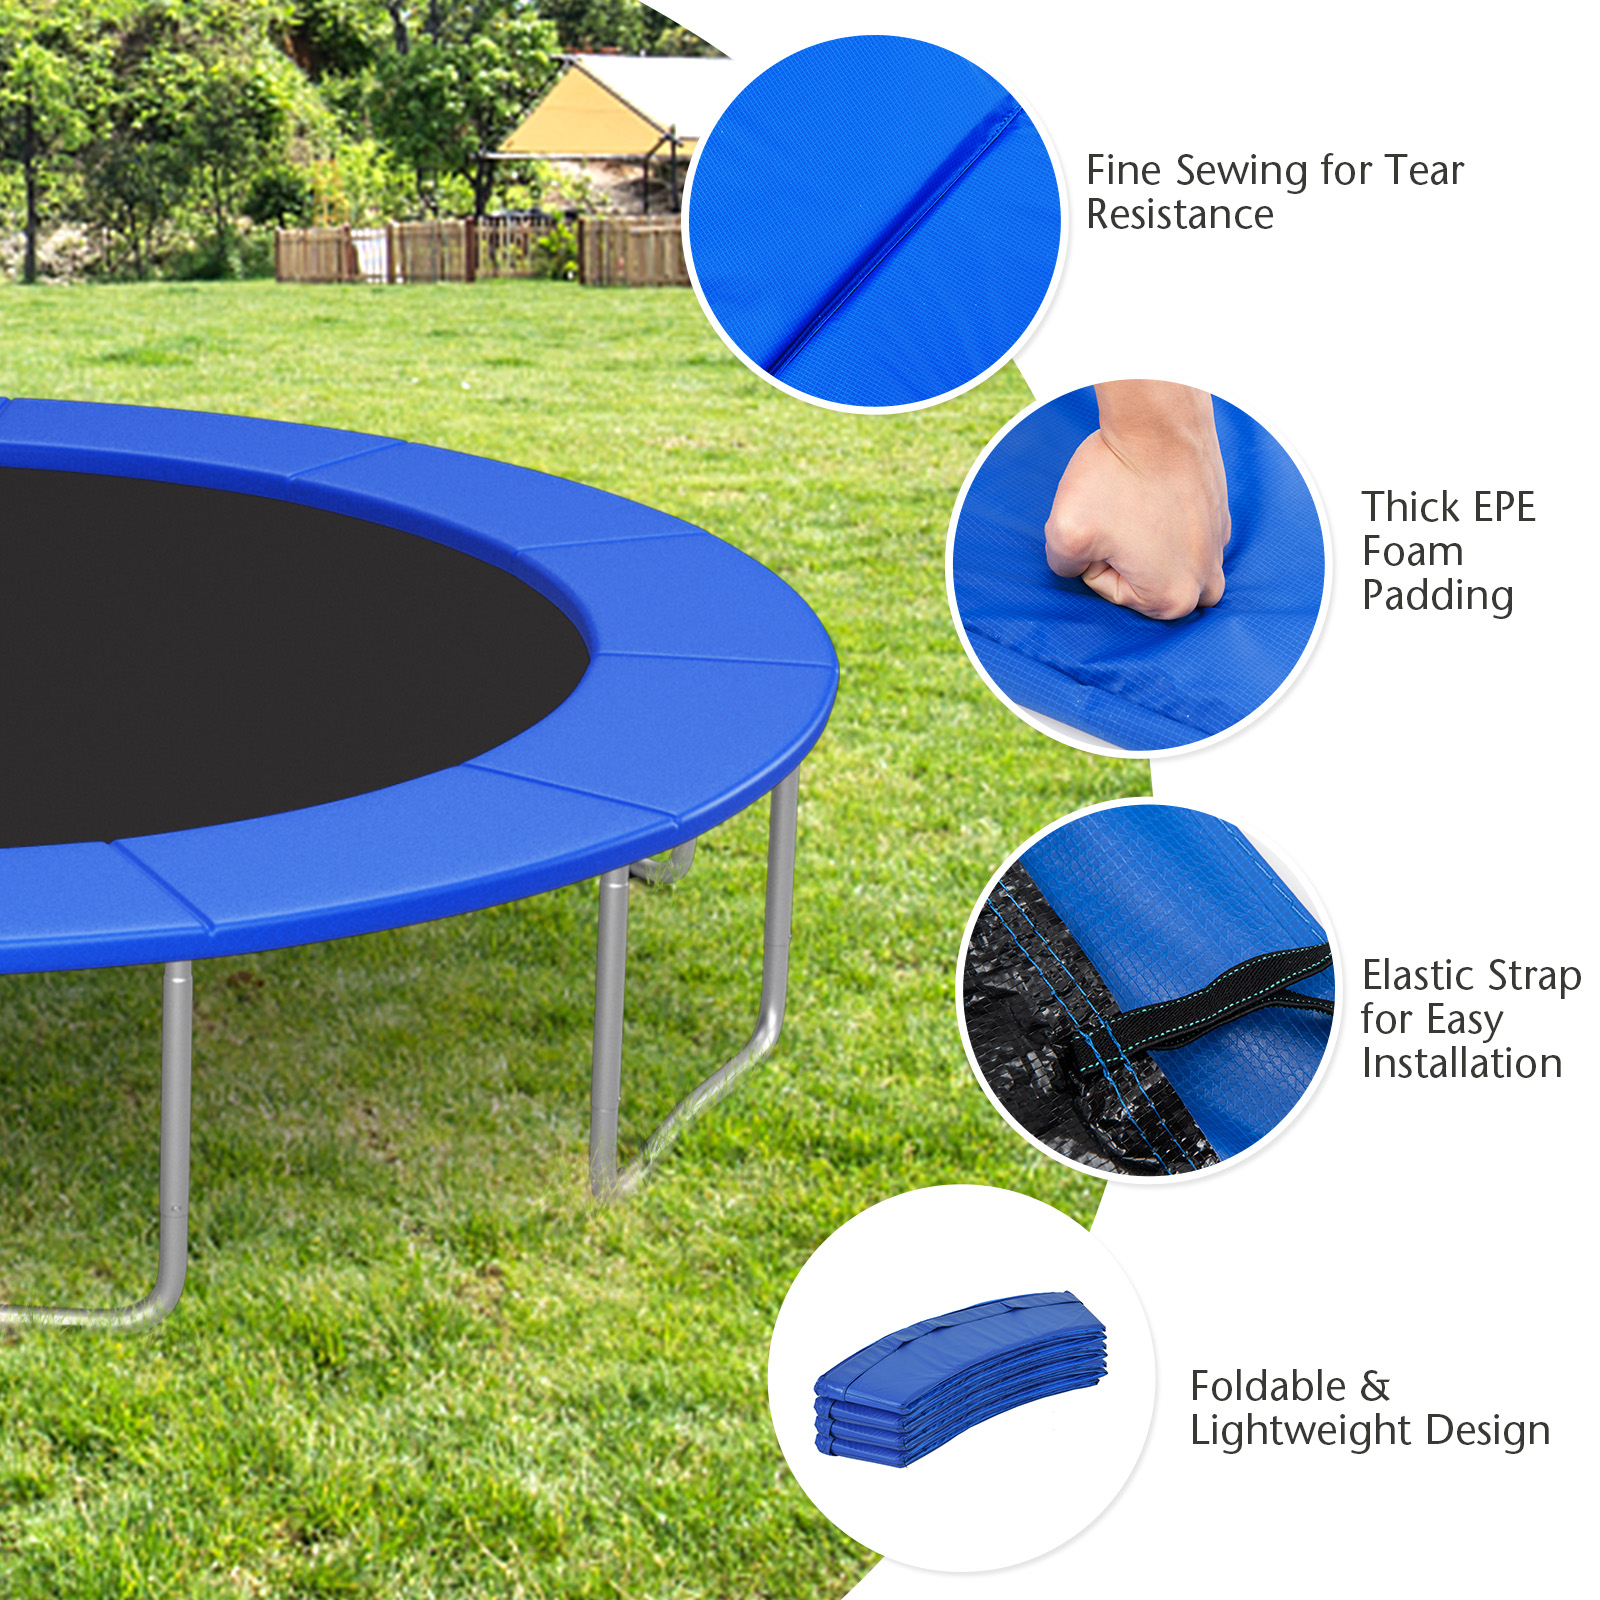 Topbuy 14FT Trampoline Pad Trampoline Replacement Safety Pad Waterproof Spring Cover Pad Blue